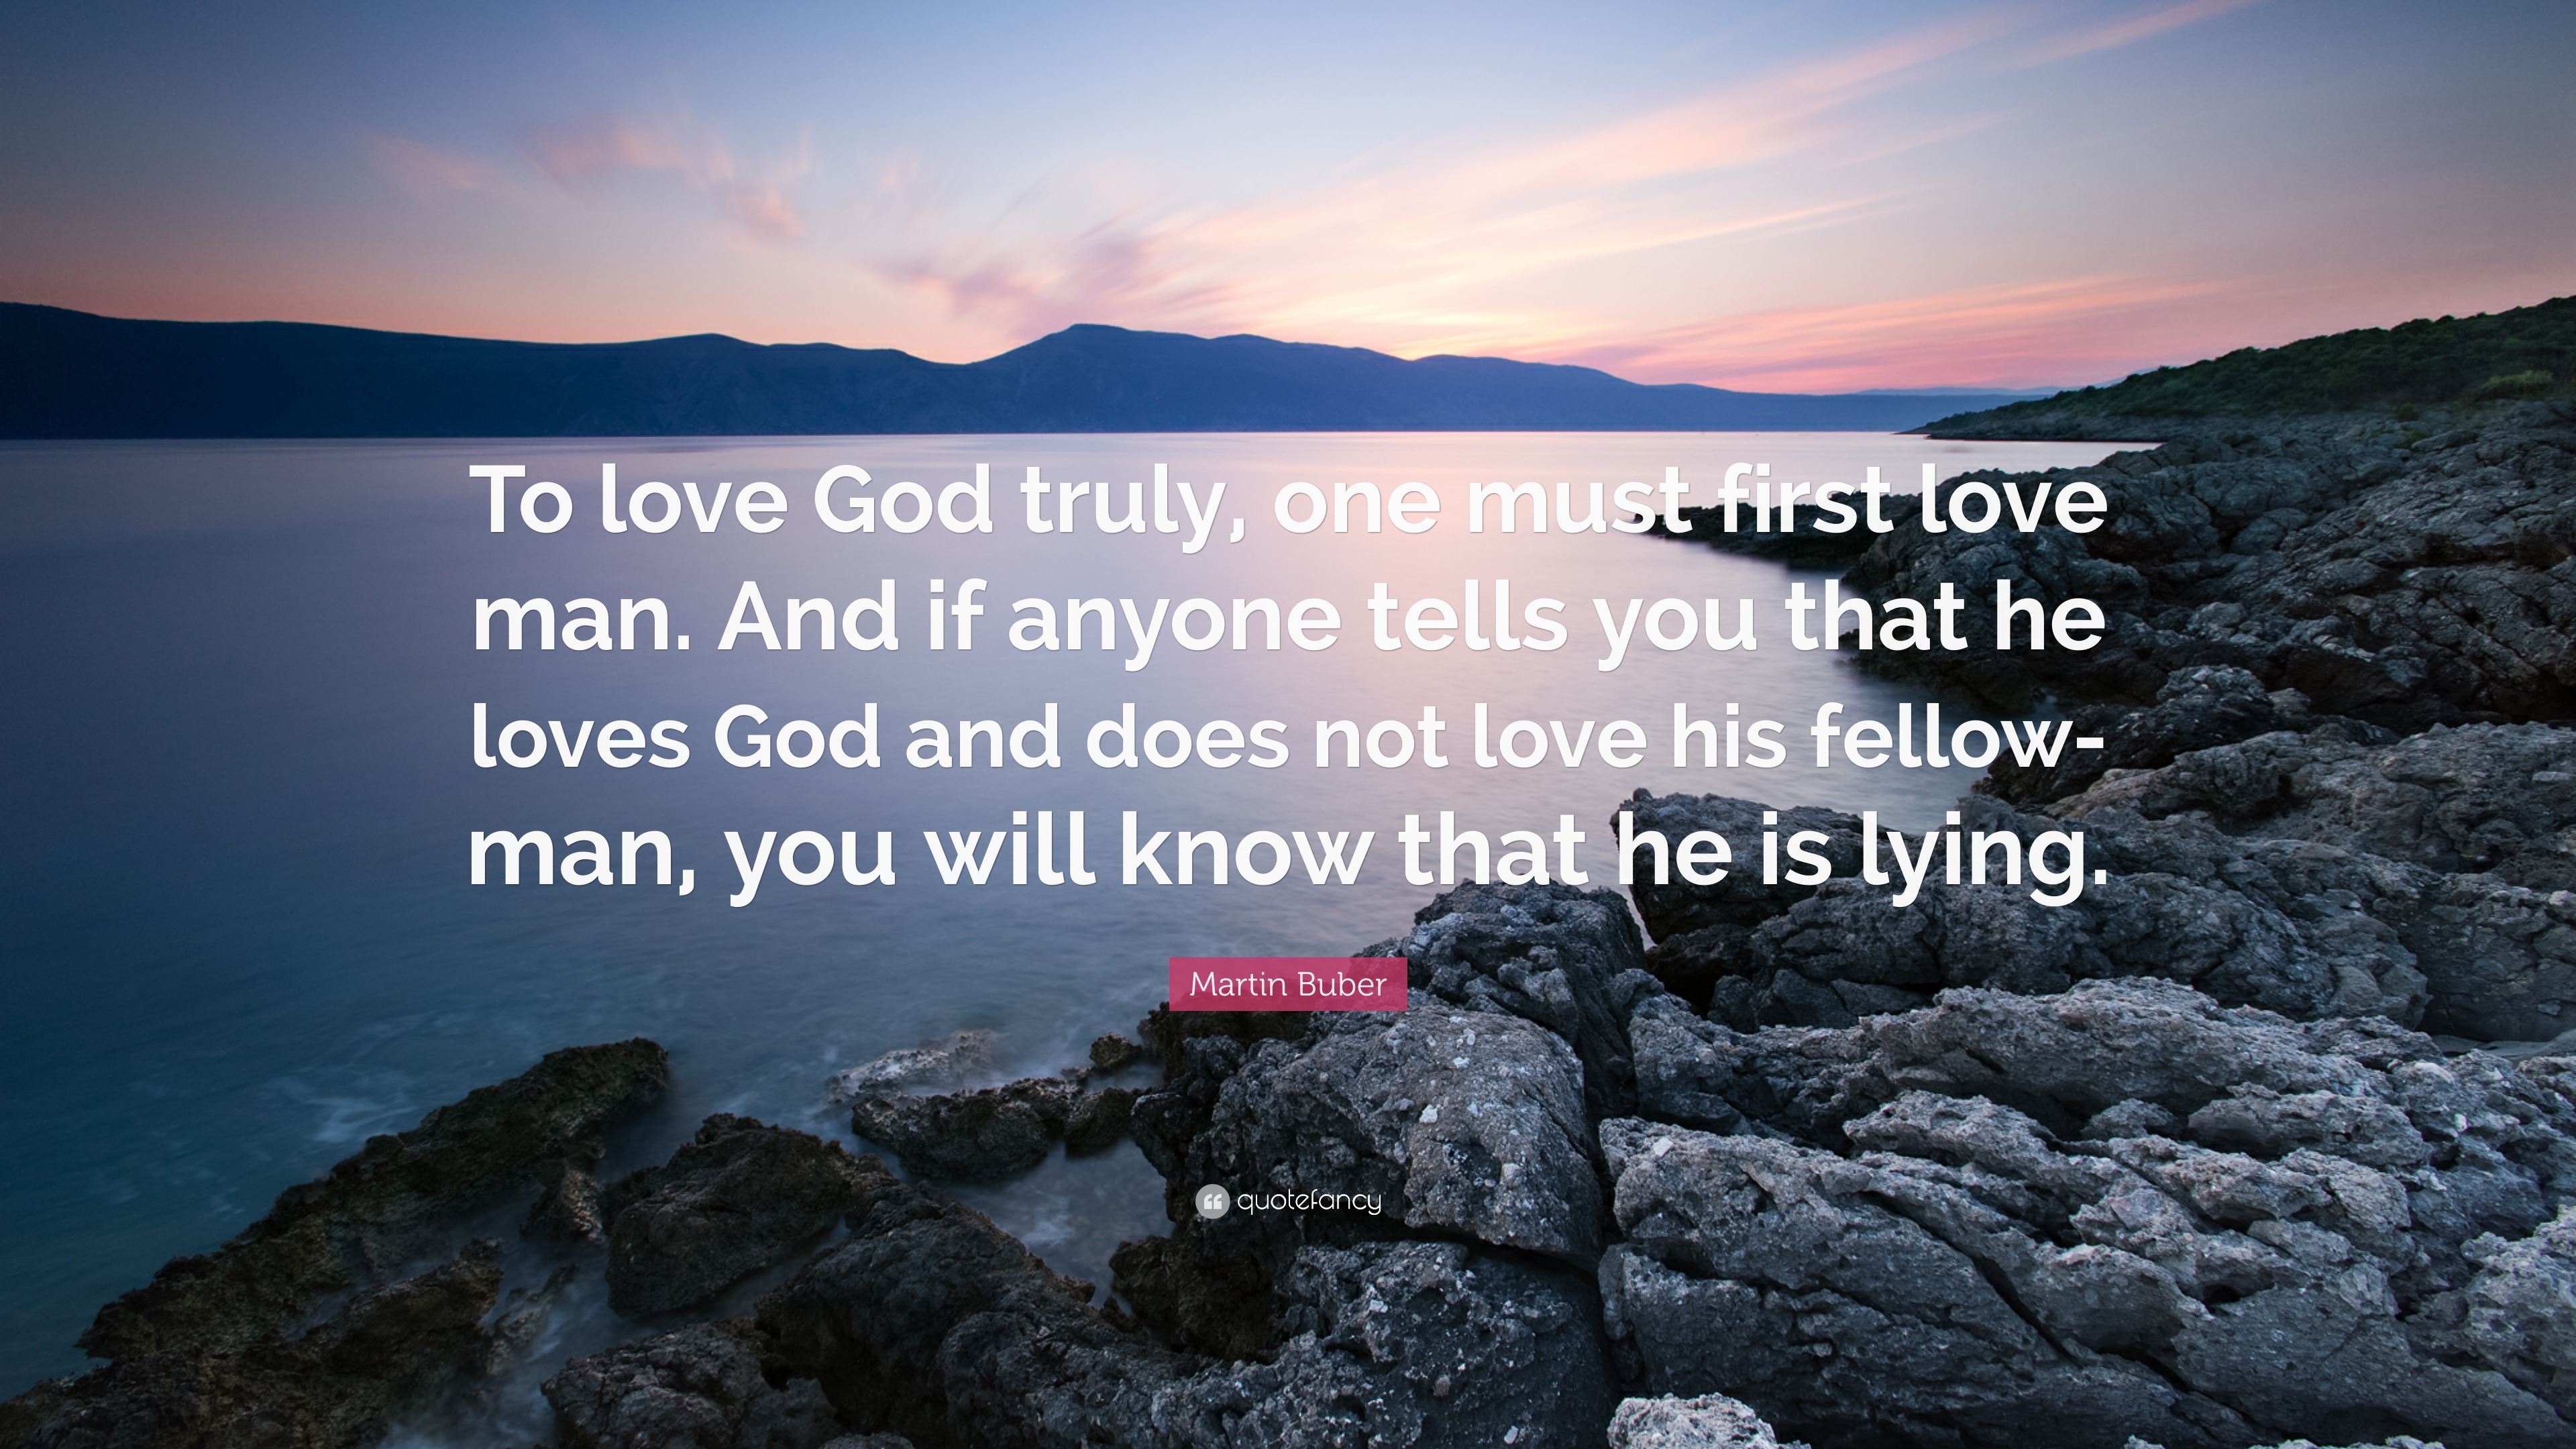 Martin Buber Quote “To love God truly one must first love man